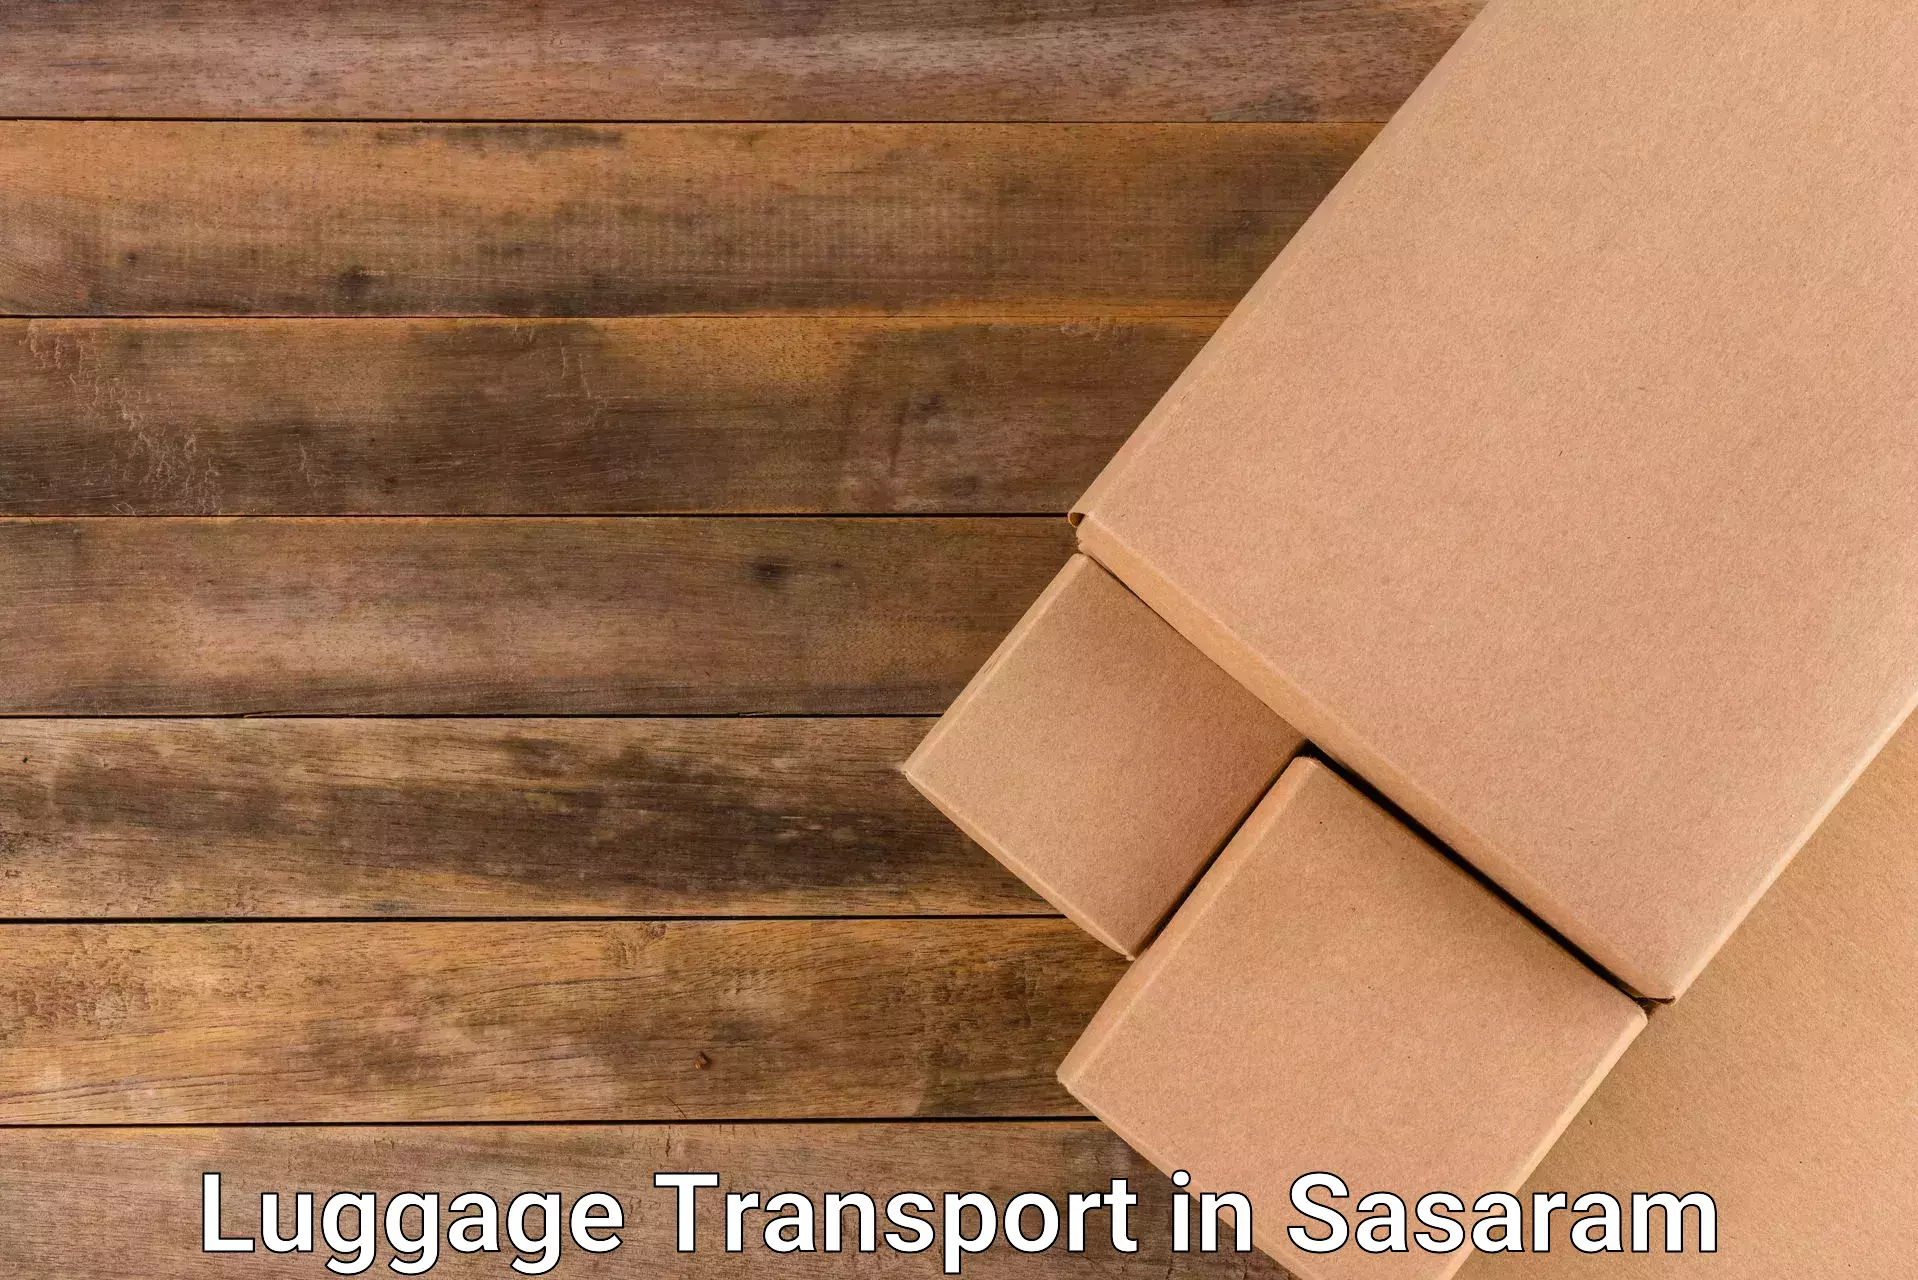 Online luggage shipping booking in Sasaram